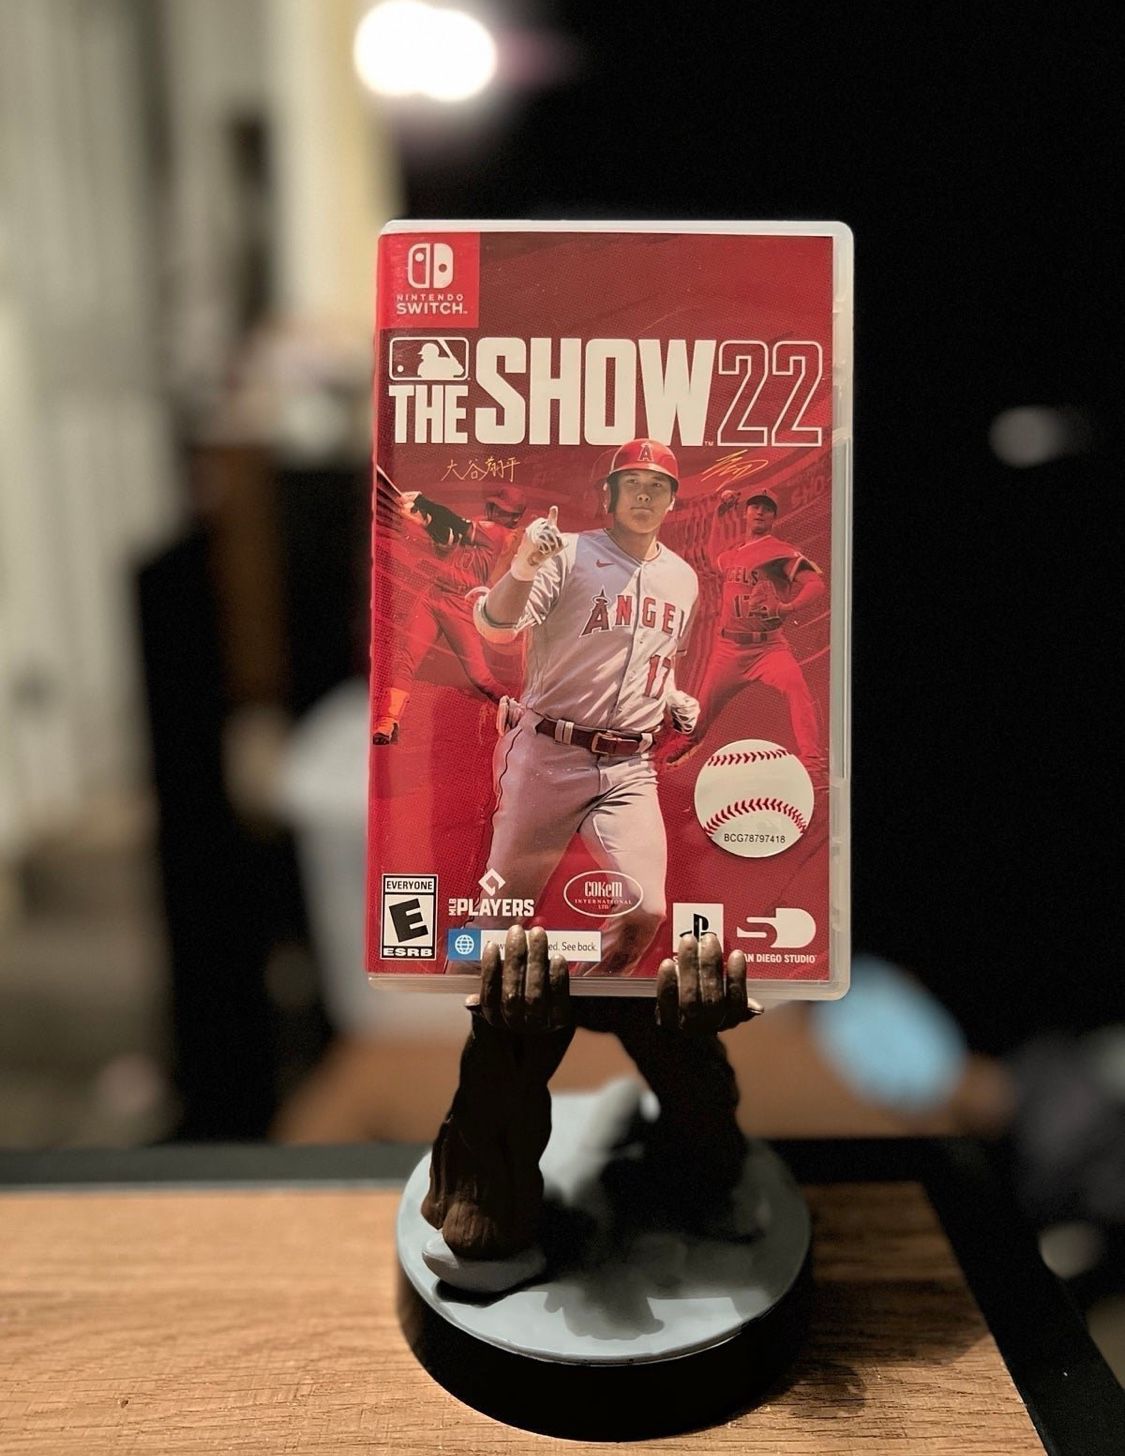 MLB The Show 22 for Nintendo Switch